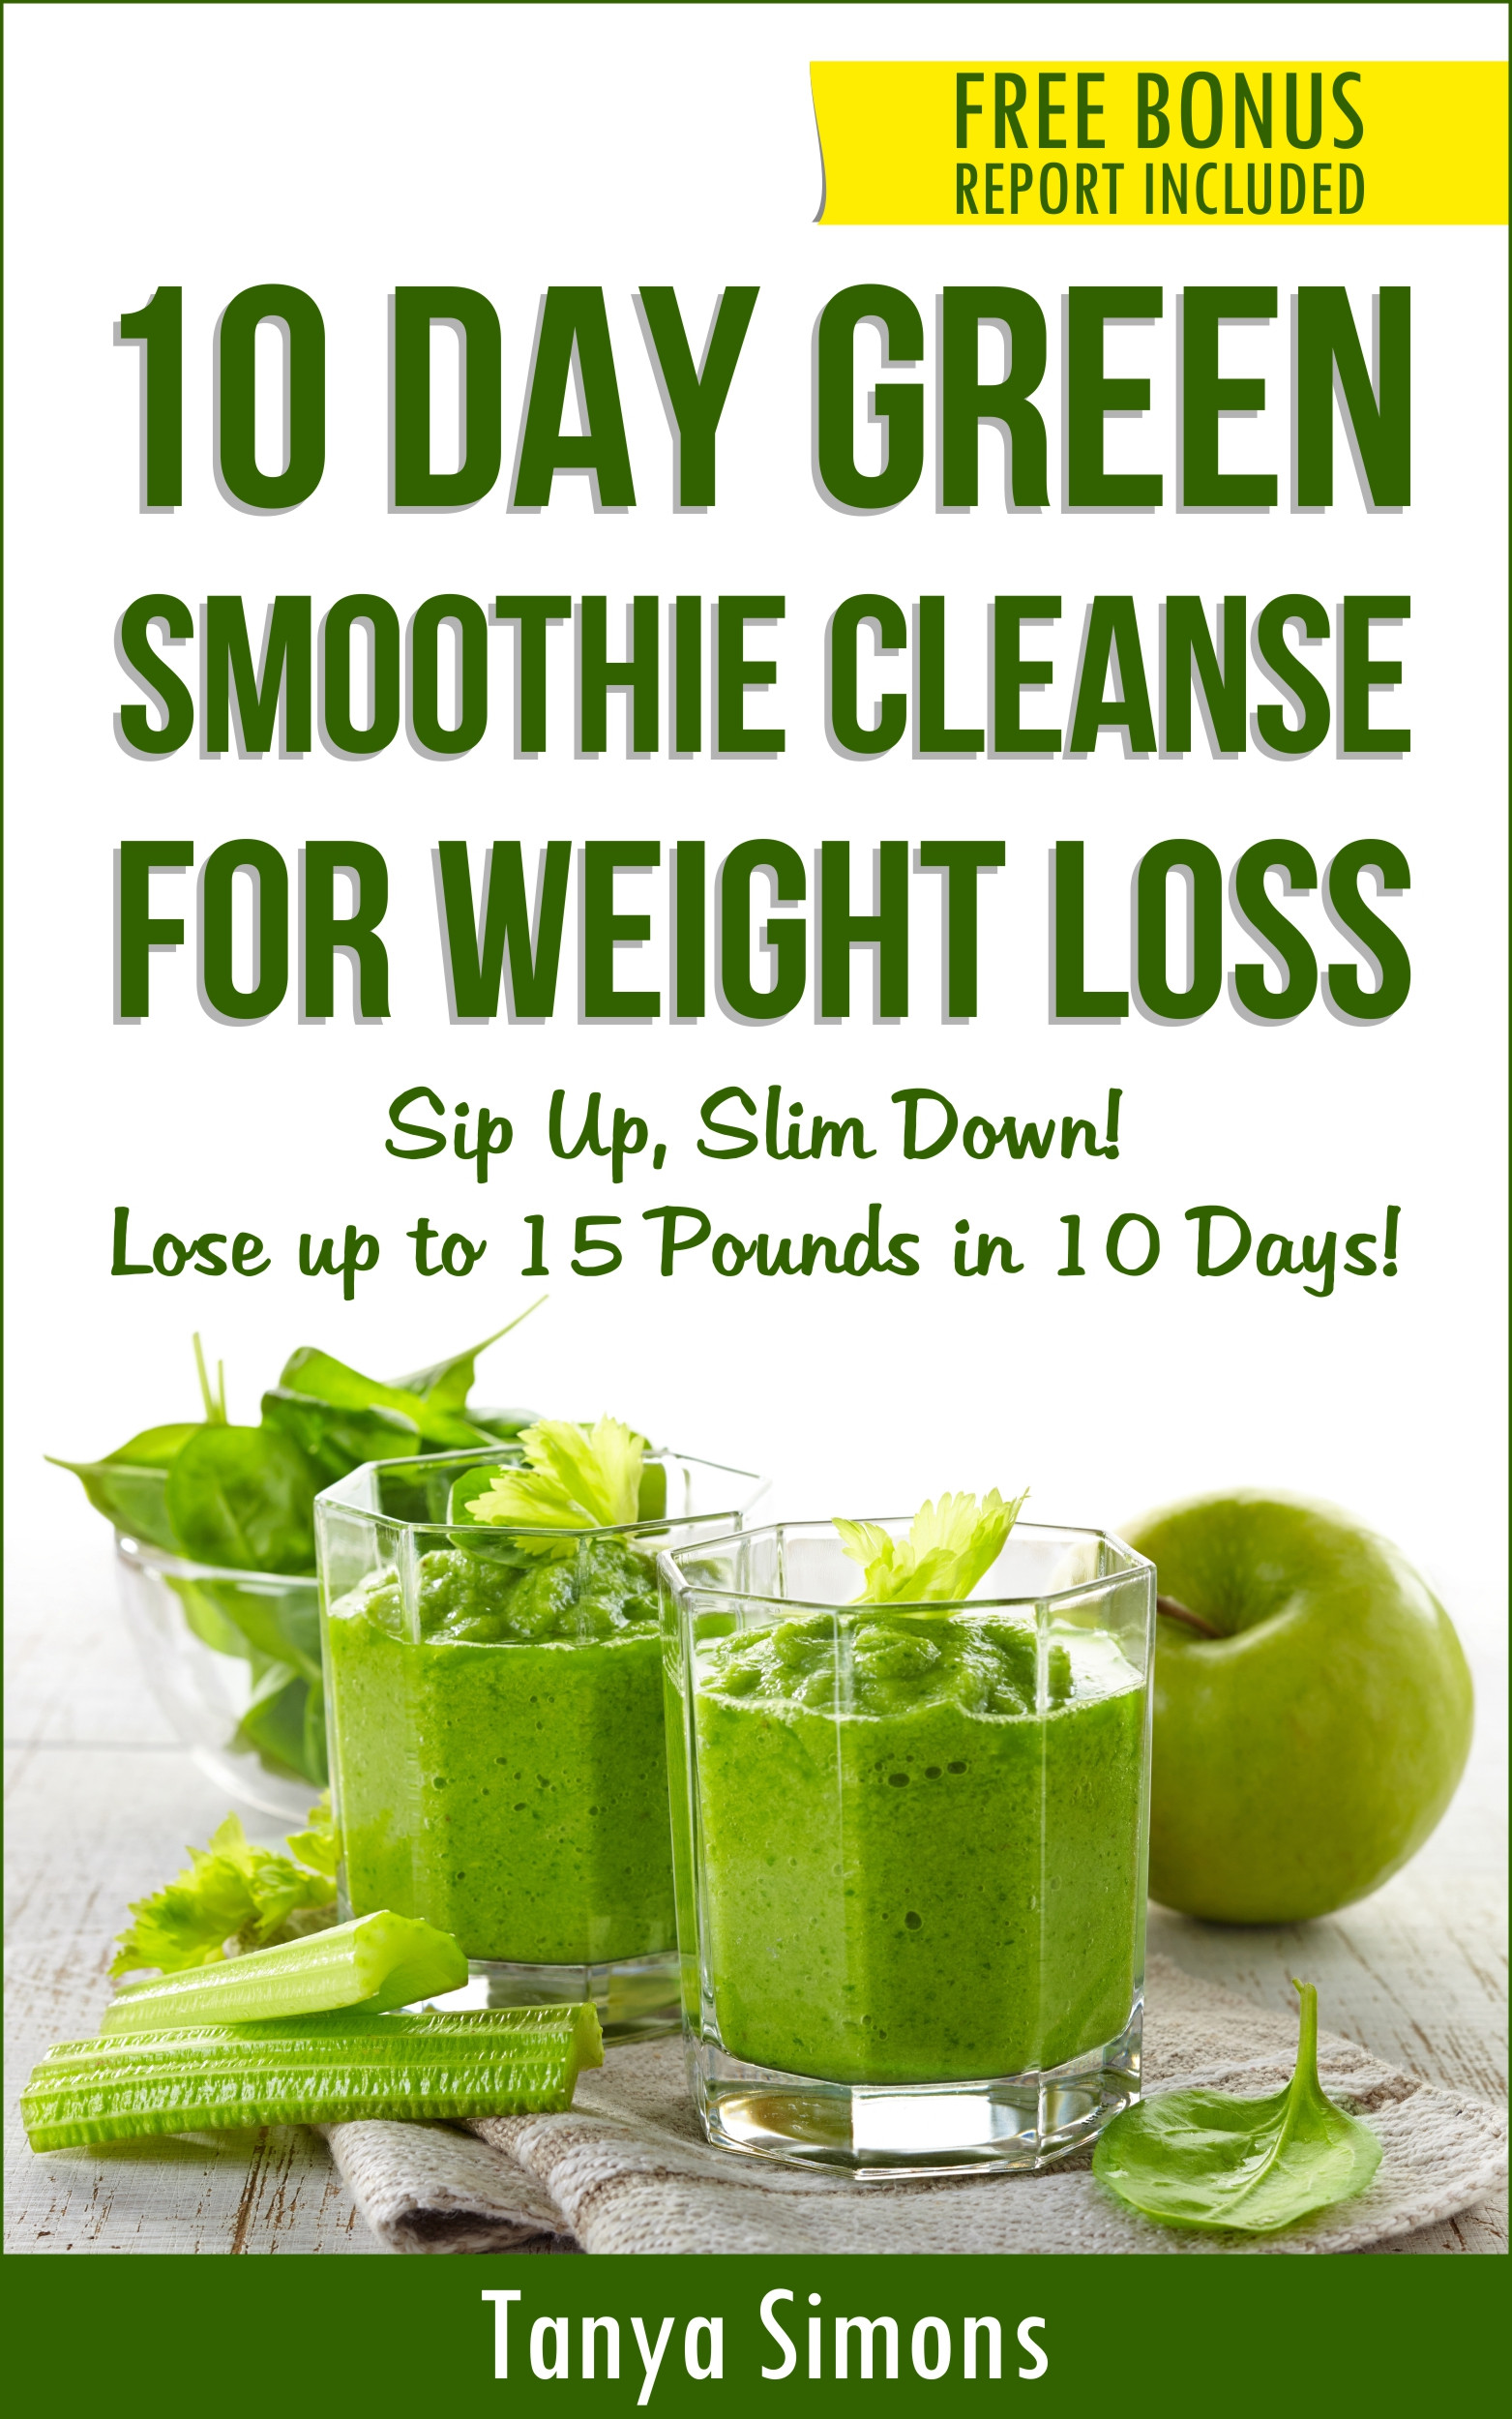 Healthy Green Smoothie Recipes For Weight Loss
 10 Day Green Smoothie Cleanse Lose 15lbs with 10 Day